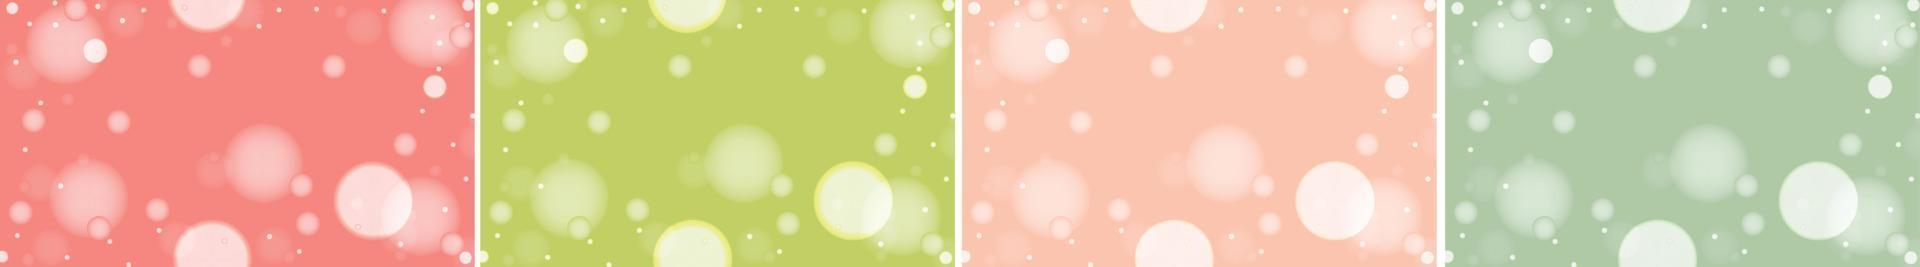 Bright colorful Bokeh Background Set. Vintage soft minimal abstract wallpaper. vector